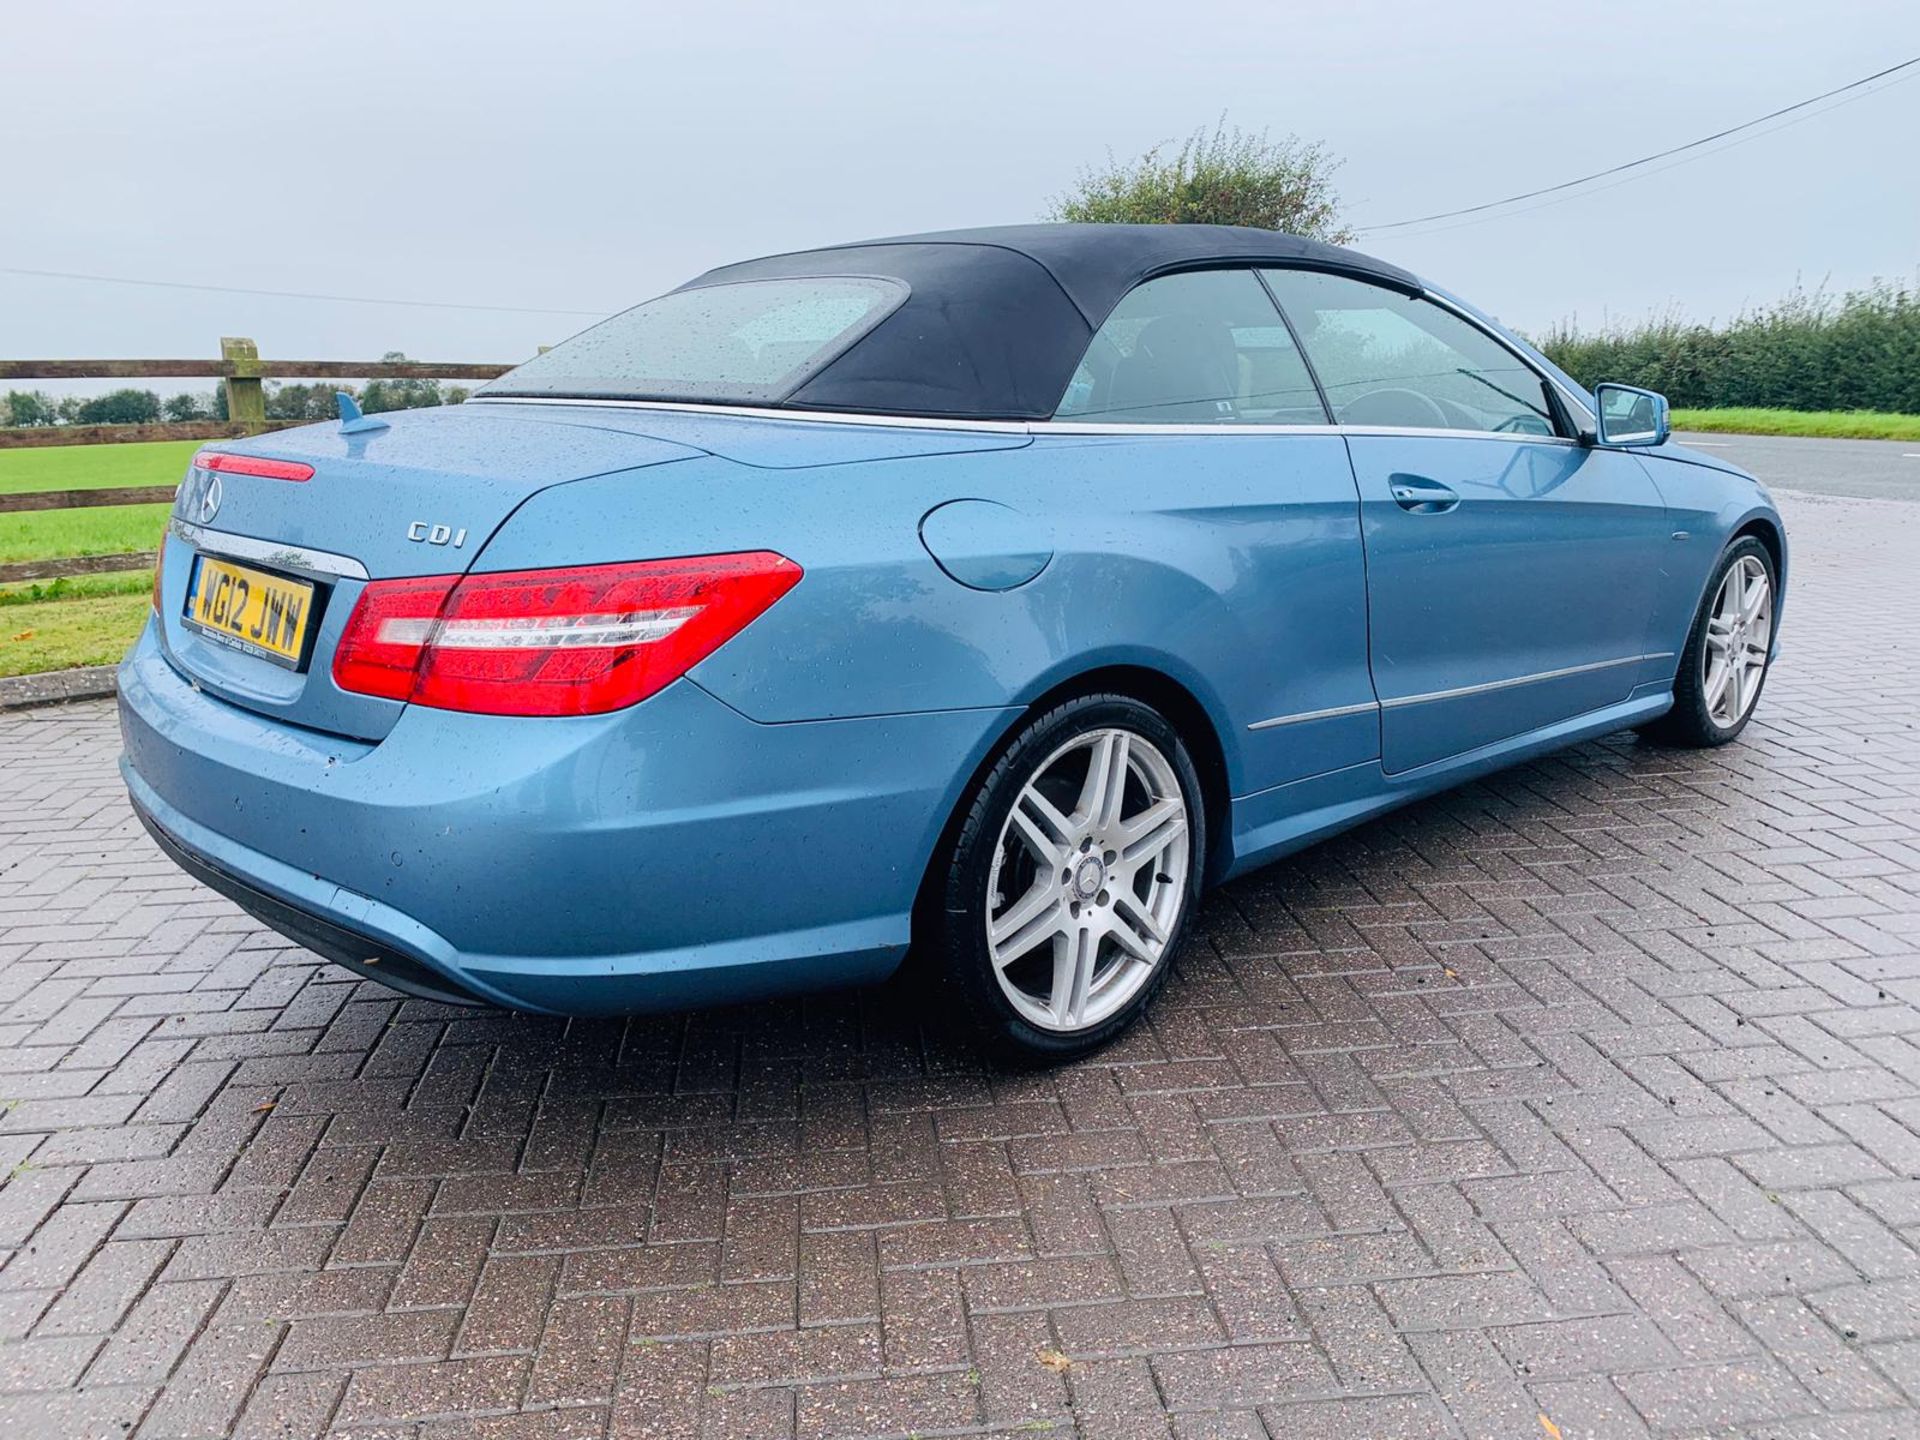 (RESERVE MET) Mercedes E220 Sport 2.1 CDI Convertible - 2012 12 Reg - Black Leather - Heated Seats - Image 6 of 17